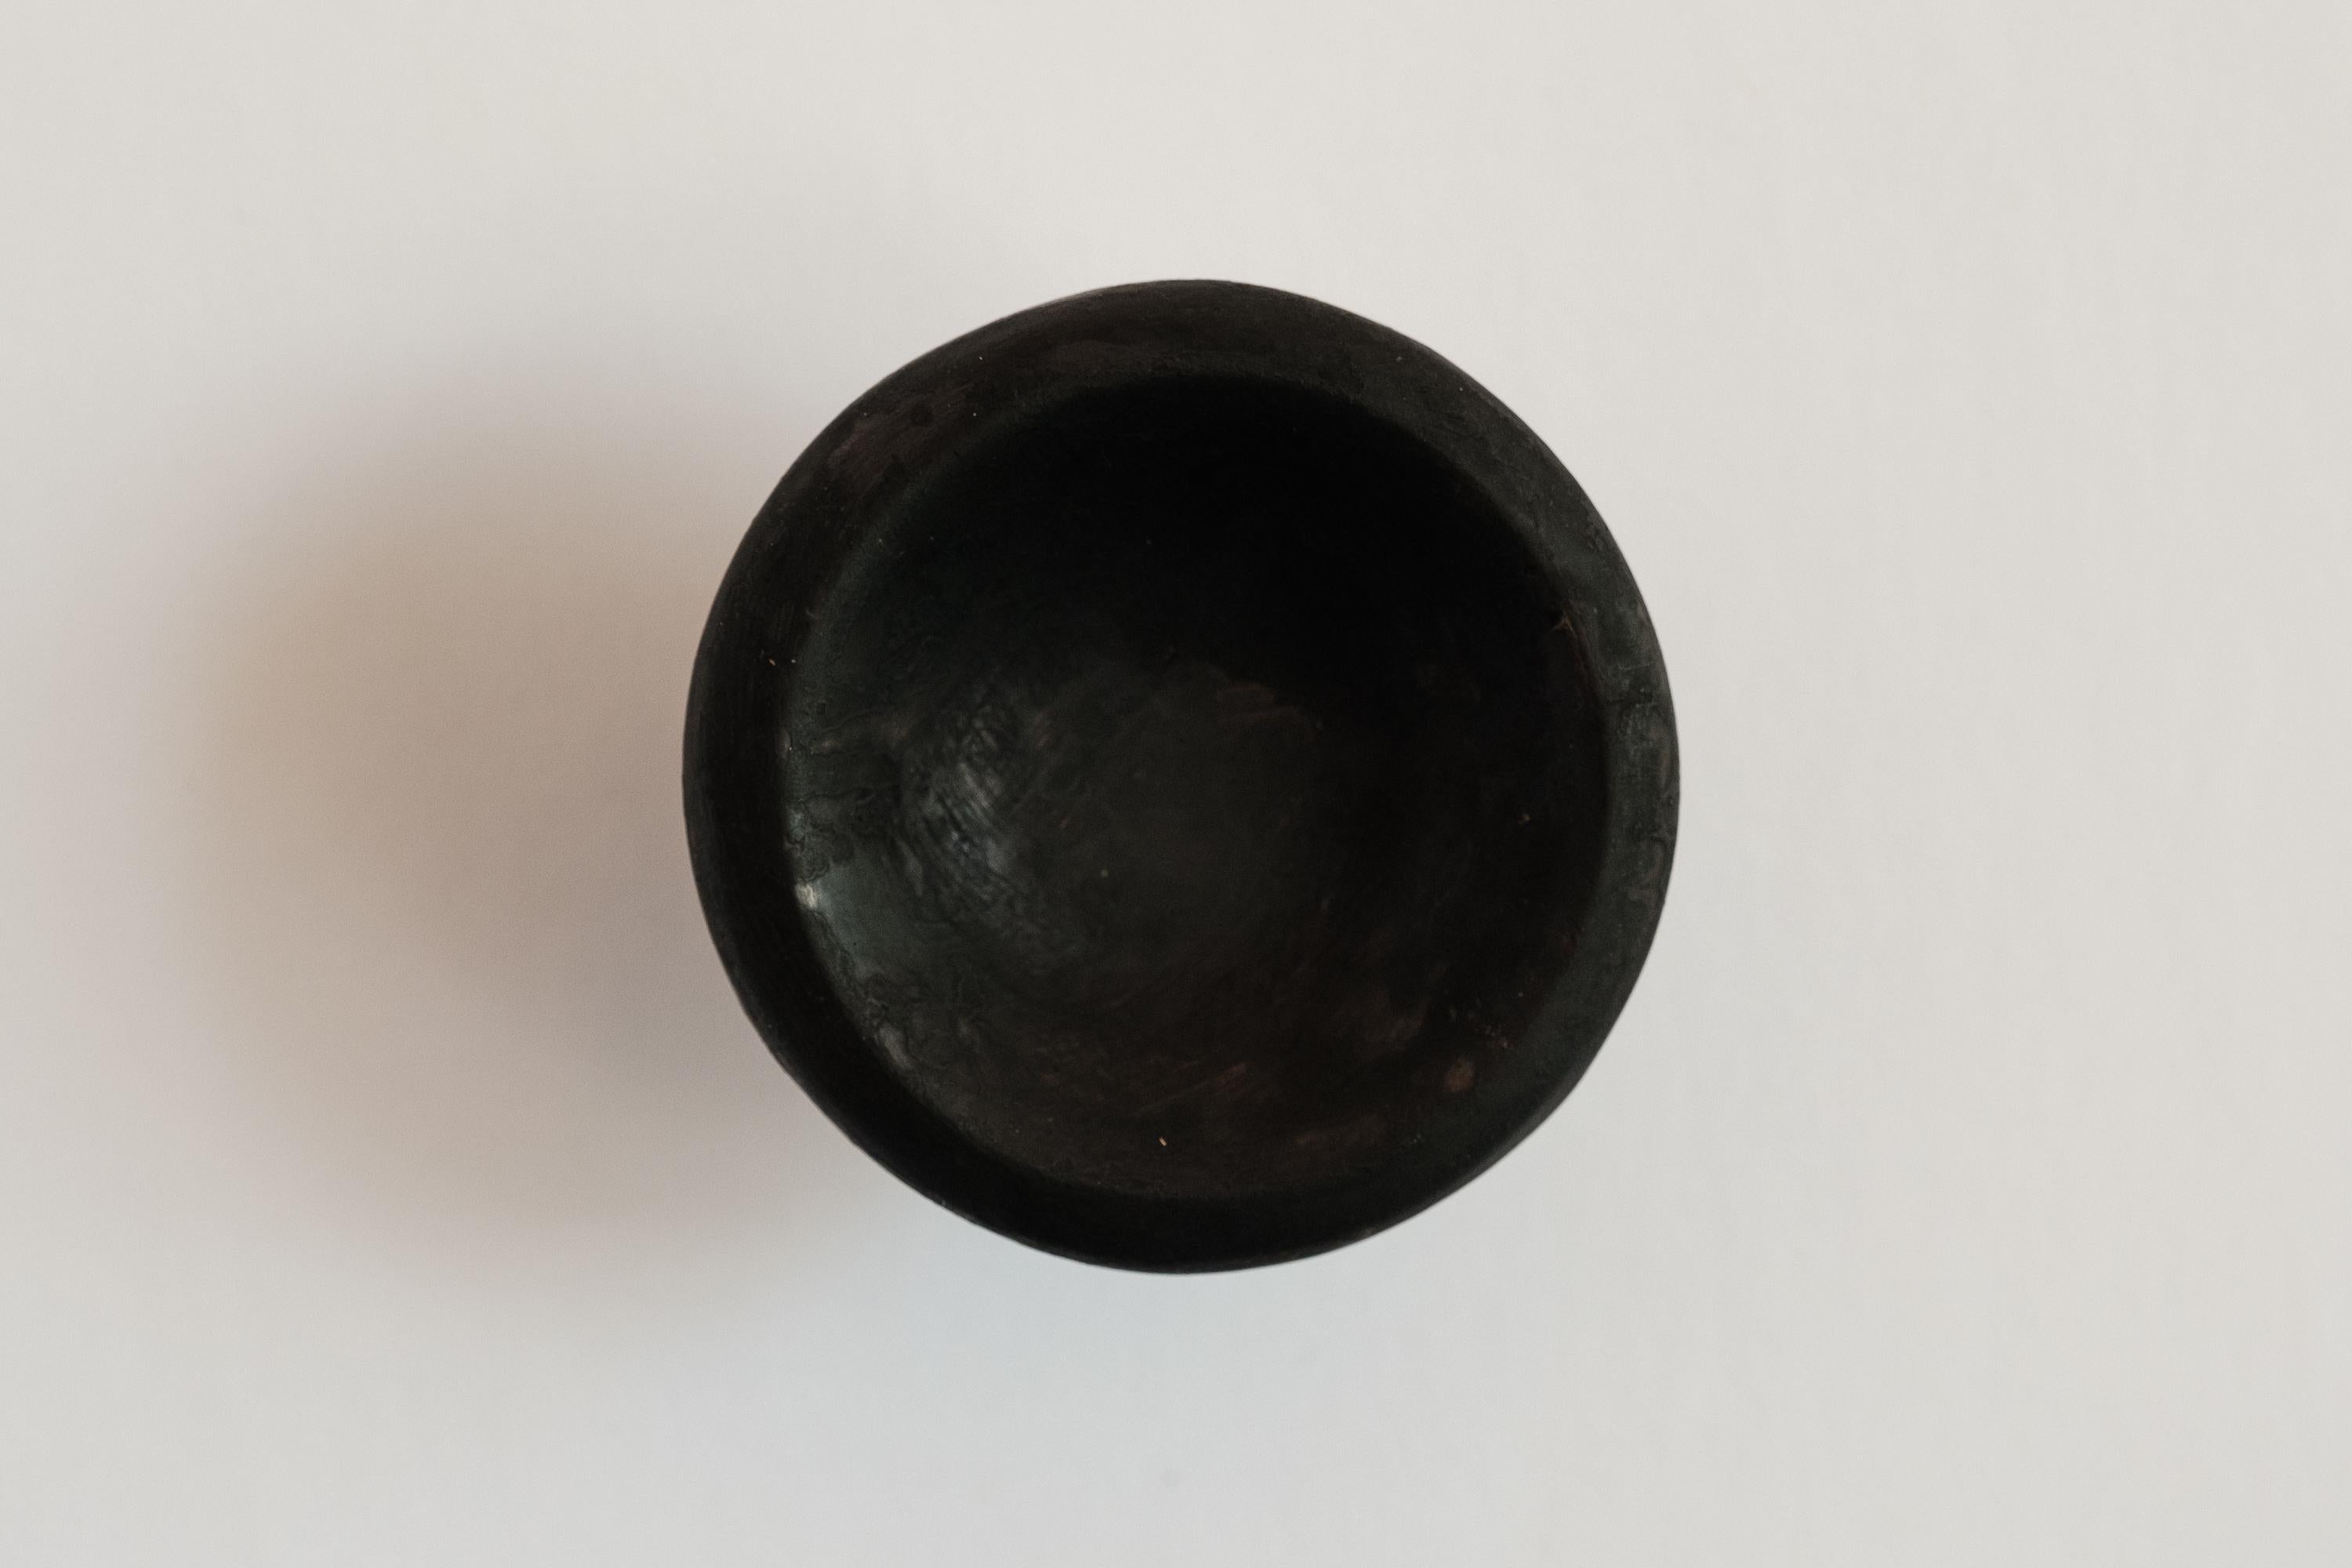 Carl Auböck Model #8040-1 patinated brass knob.

Designed in the 1950s, this versatile and Minimalist Viennese knob is executed in patinated brass by Werkstätte Carl Auböck, Austria. Its minimalist design combines clean form with